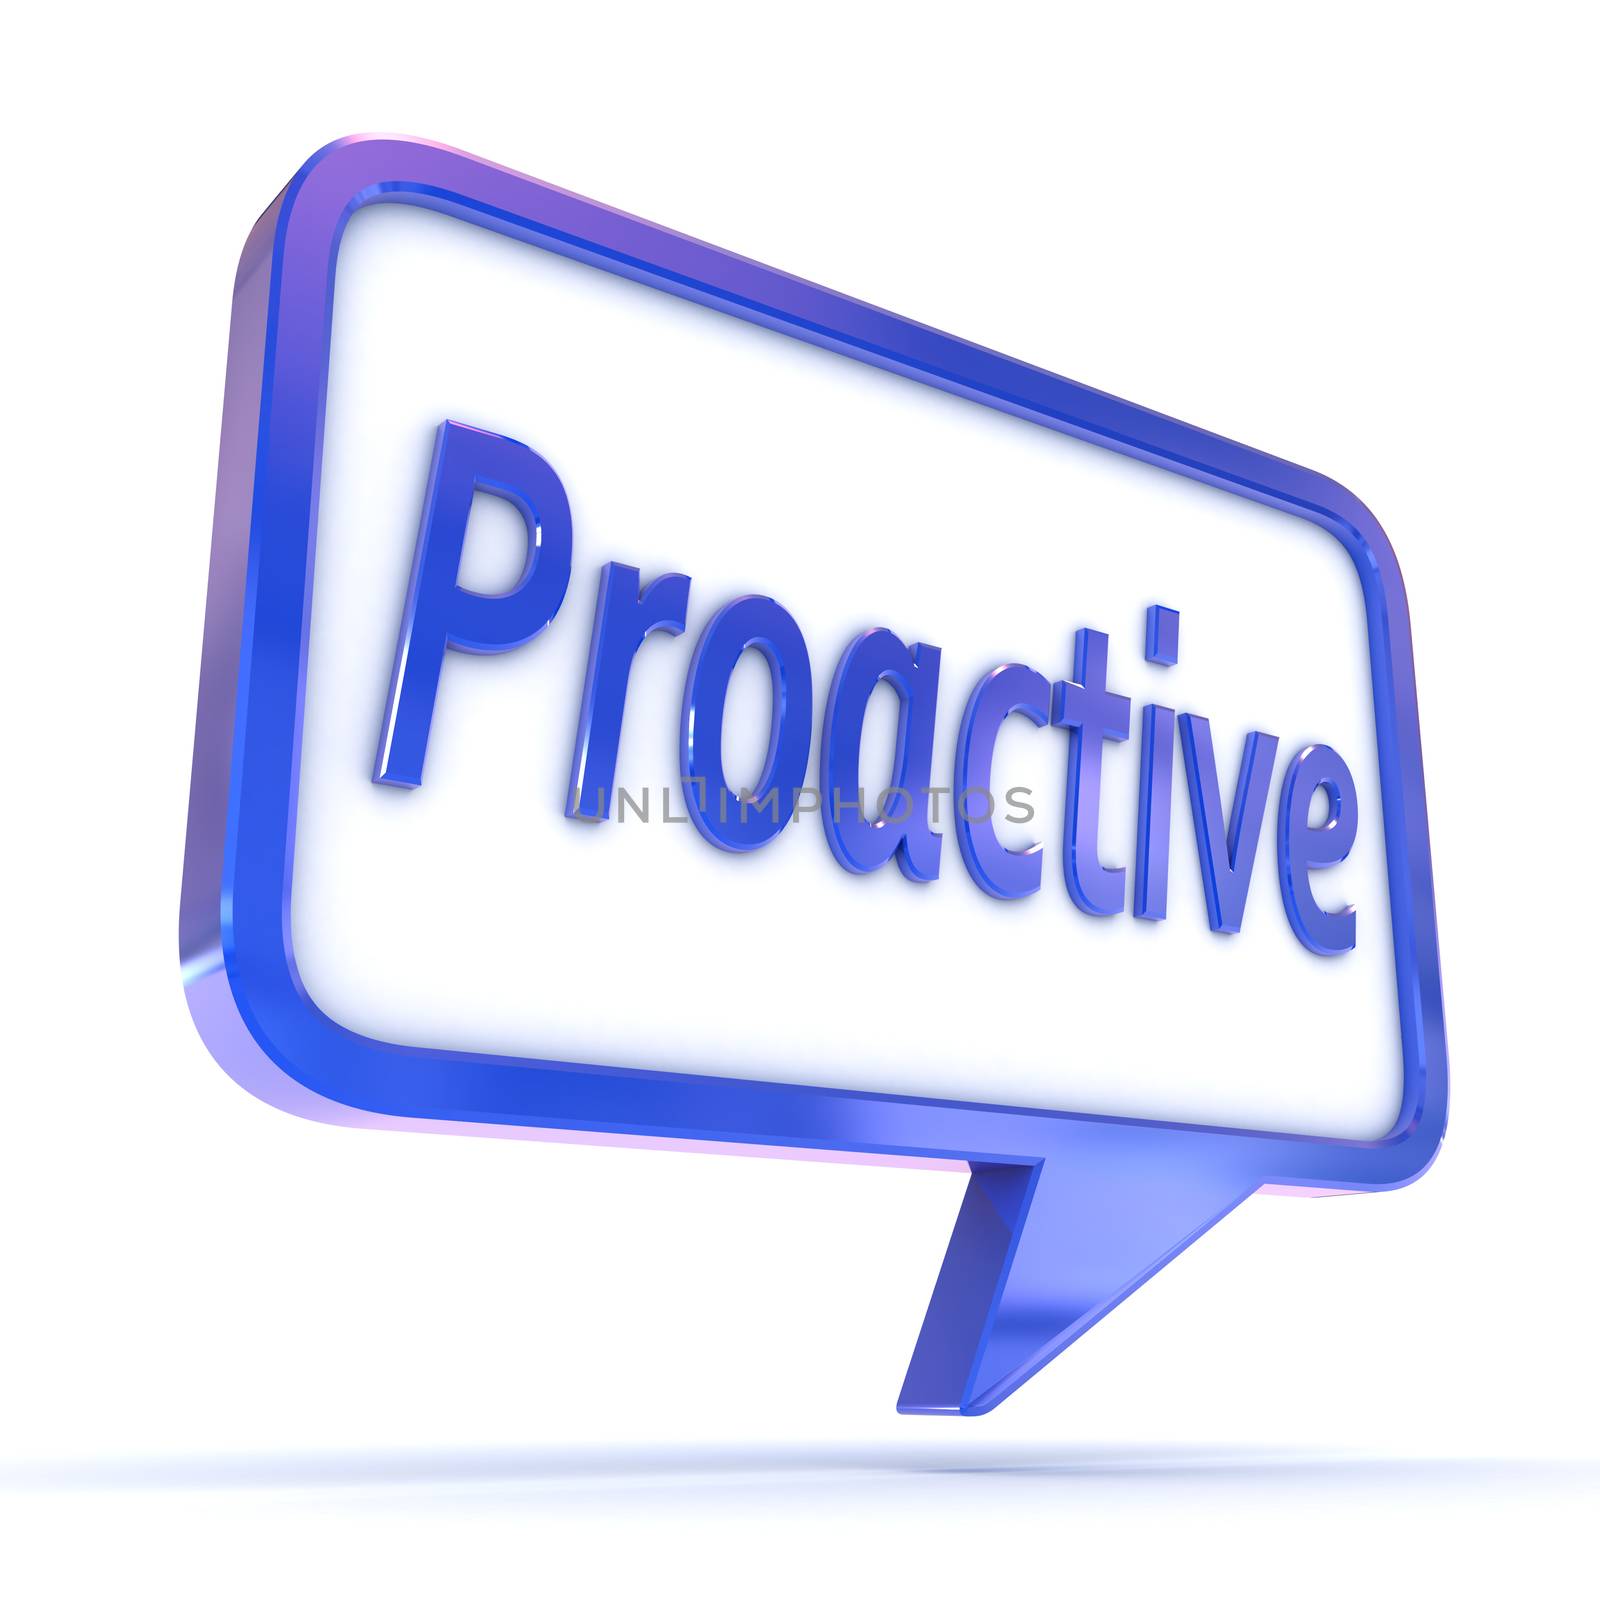 A Colourful 3d Rendered Concept Illustration showing "Proactive" writen in a Speech Bubble